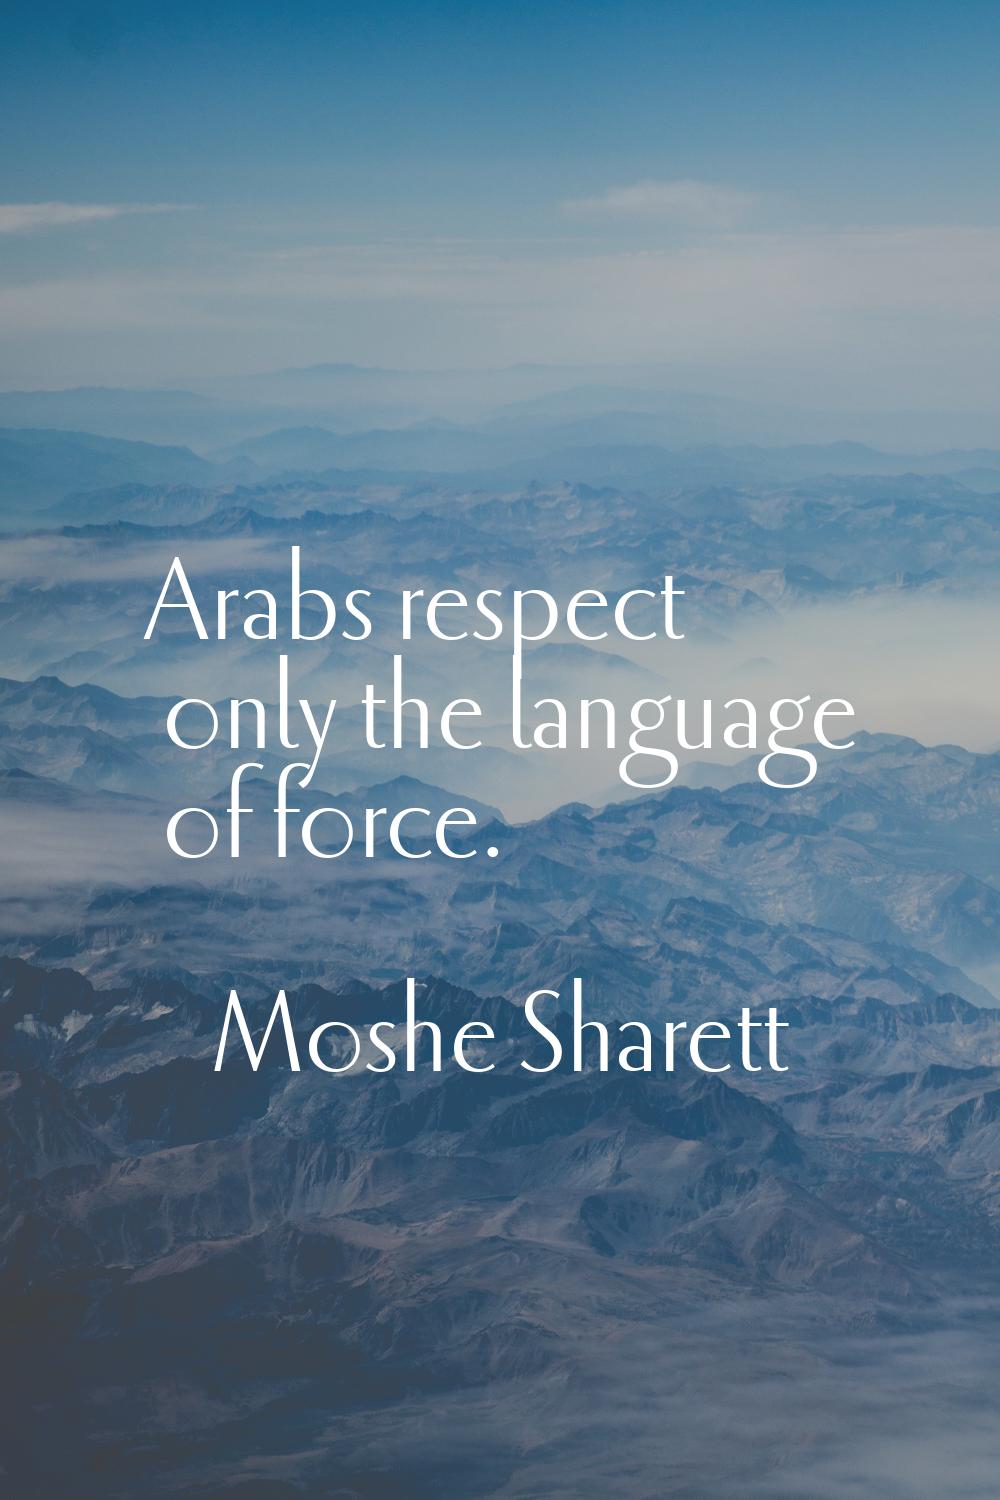 Arabs respect only the language of force.